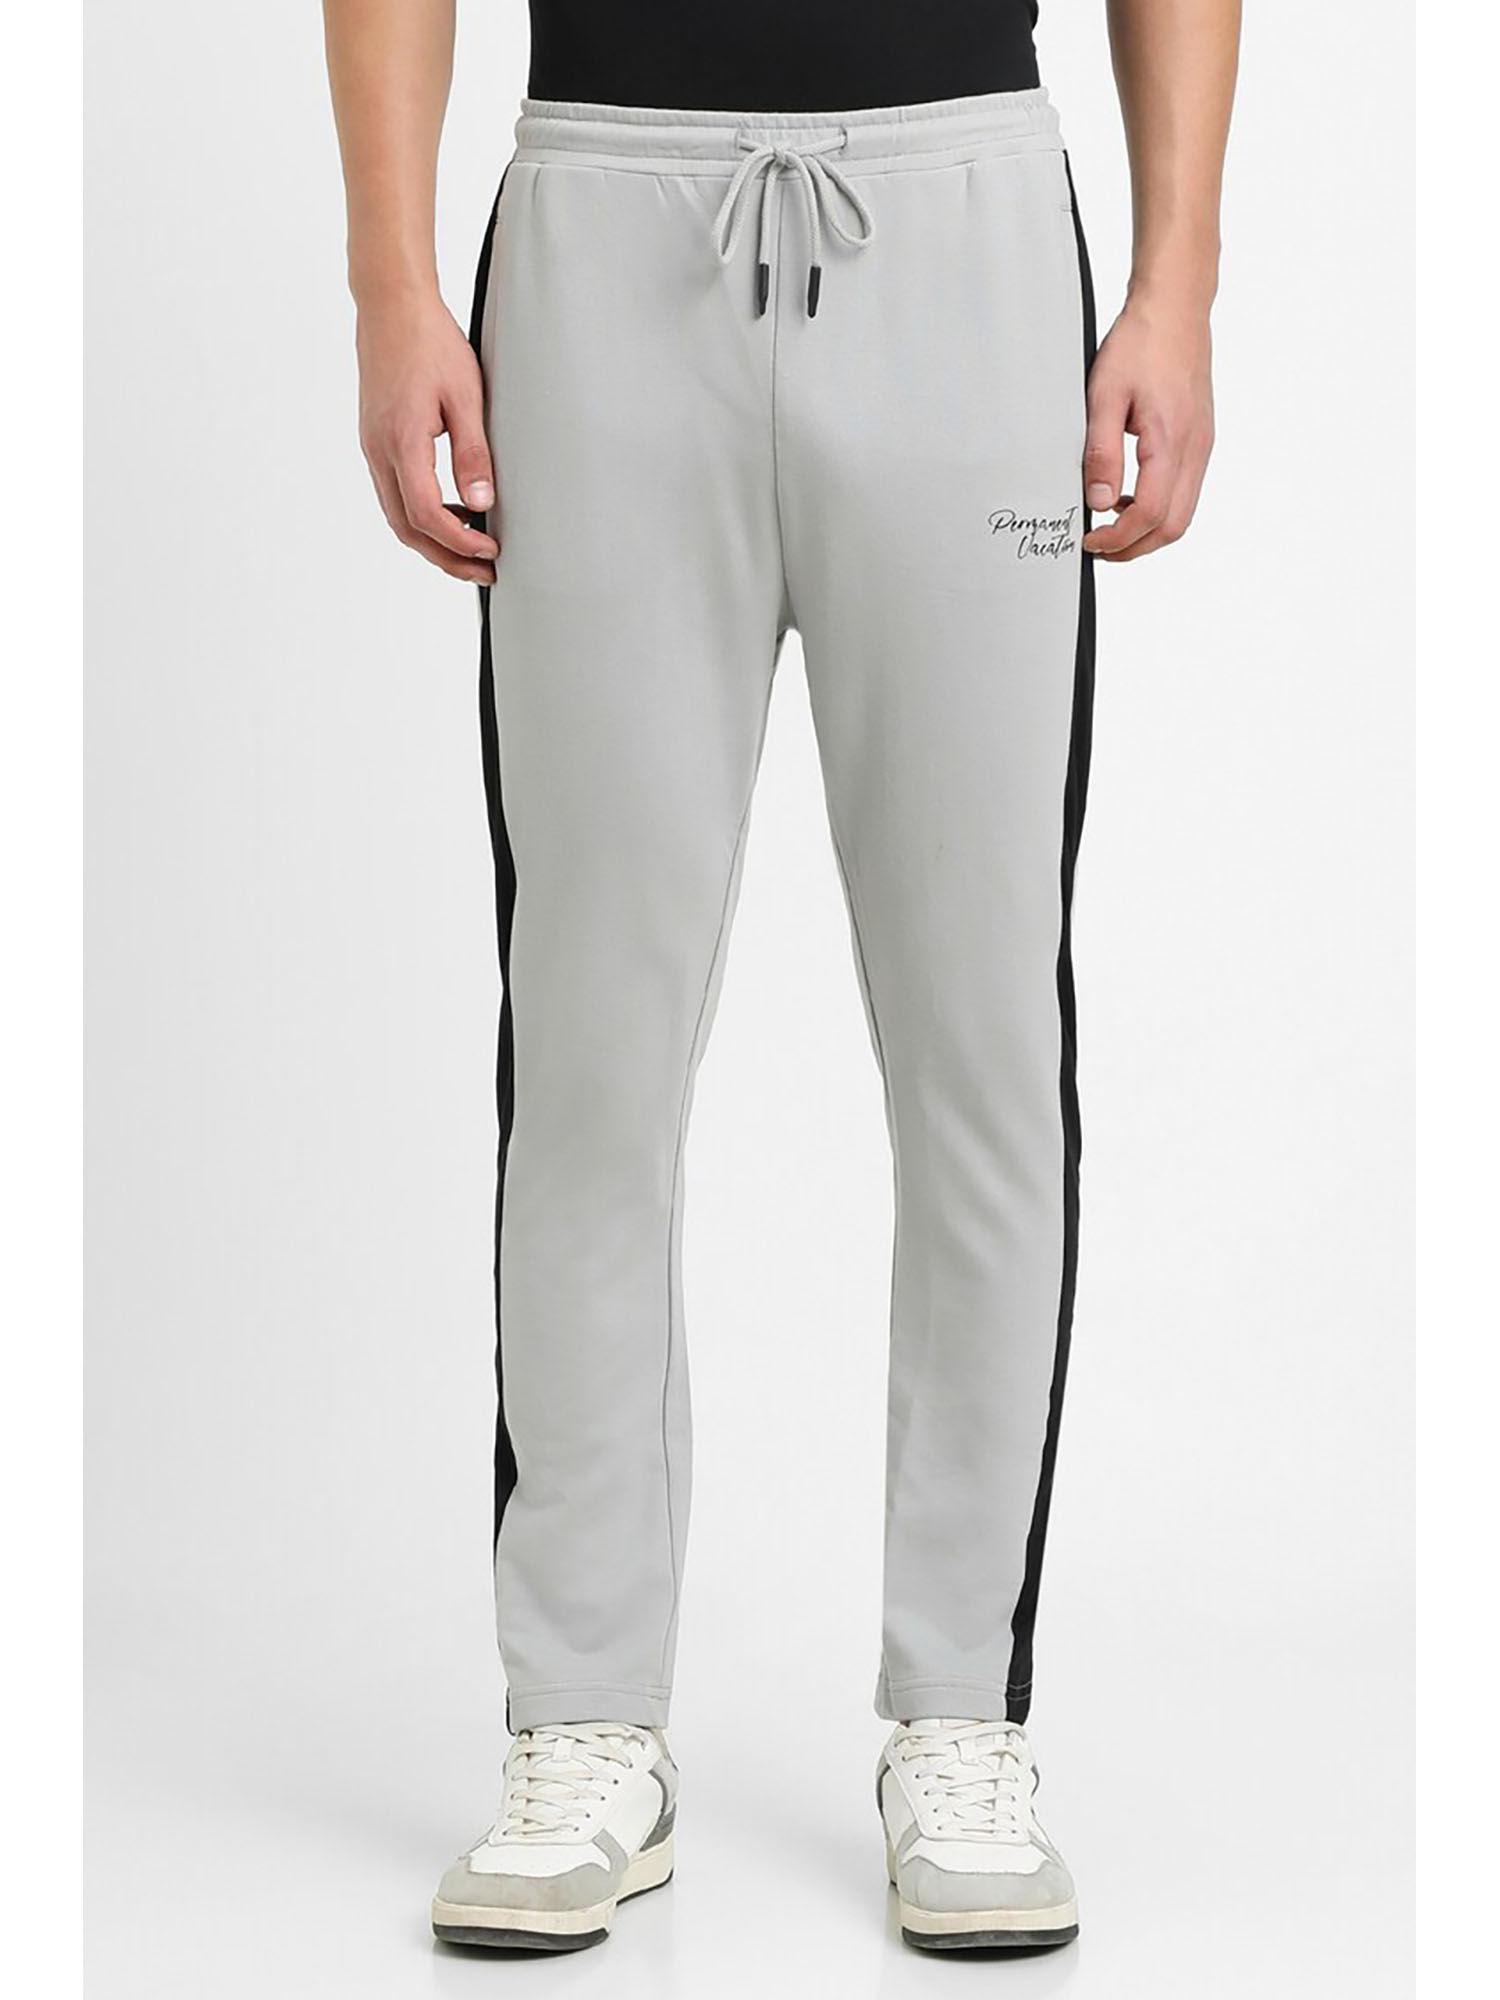 grey solid track pant